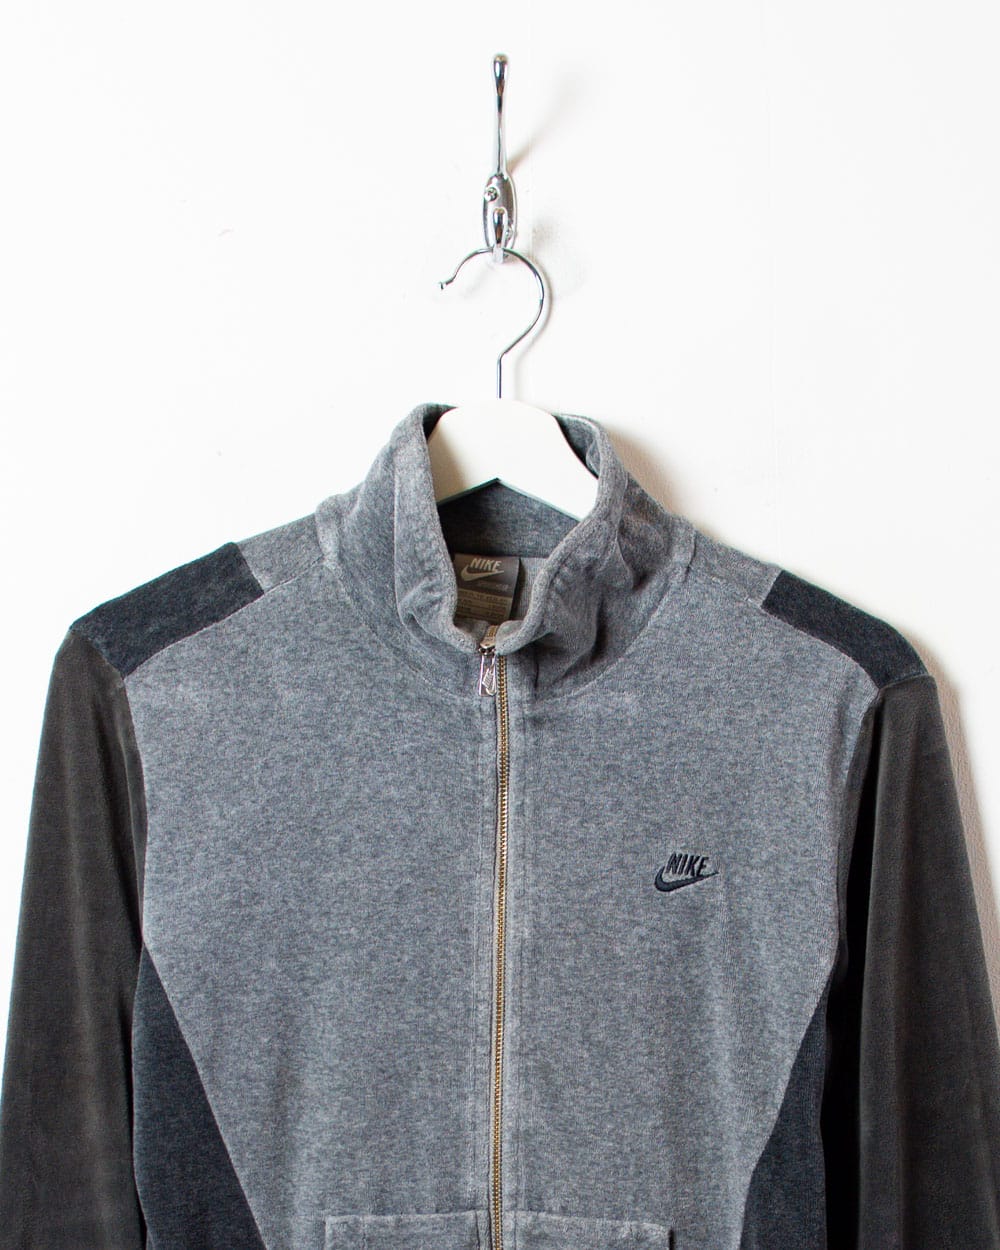 Stone Nike Velour Tracksuit Top - X-Small Women's